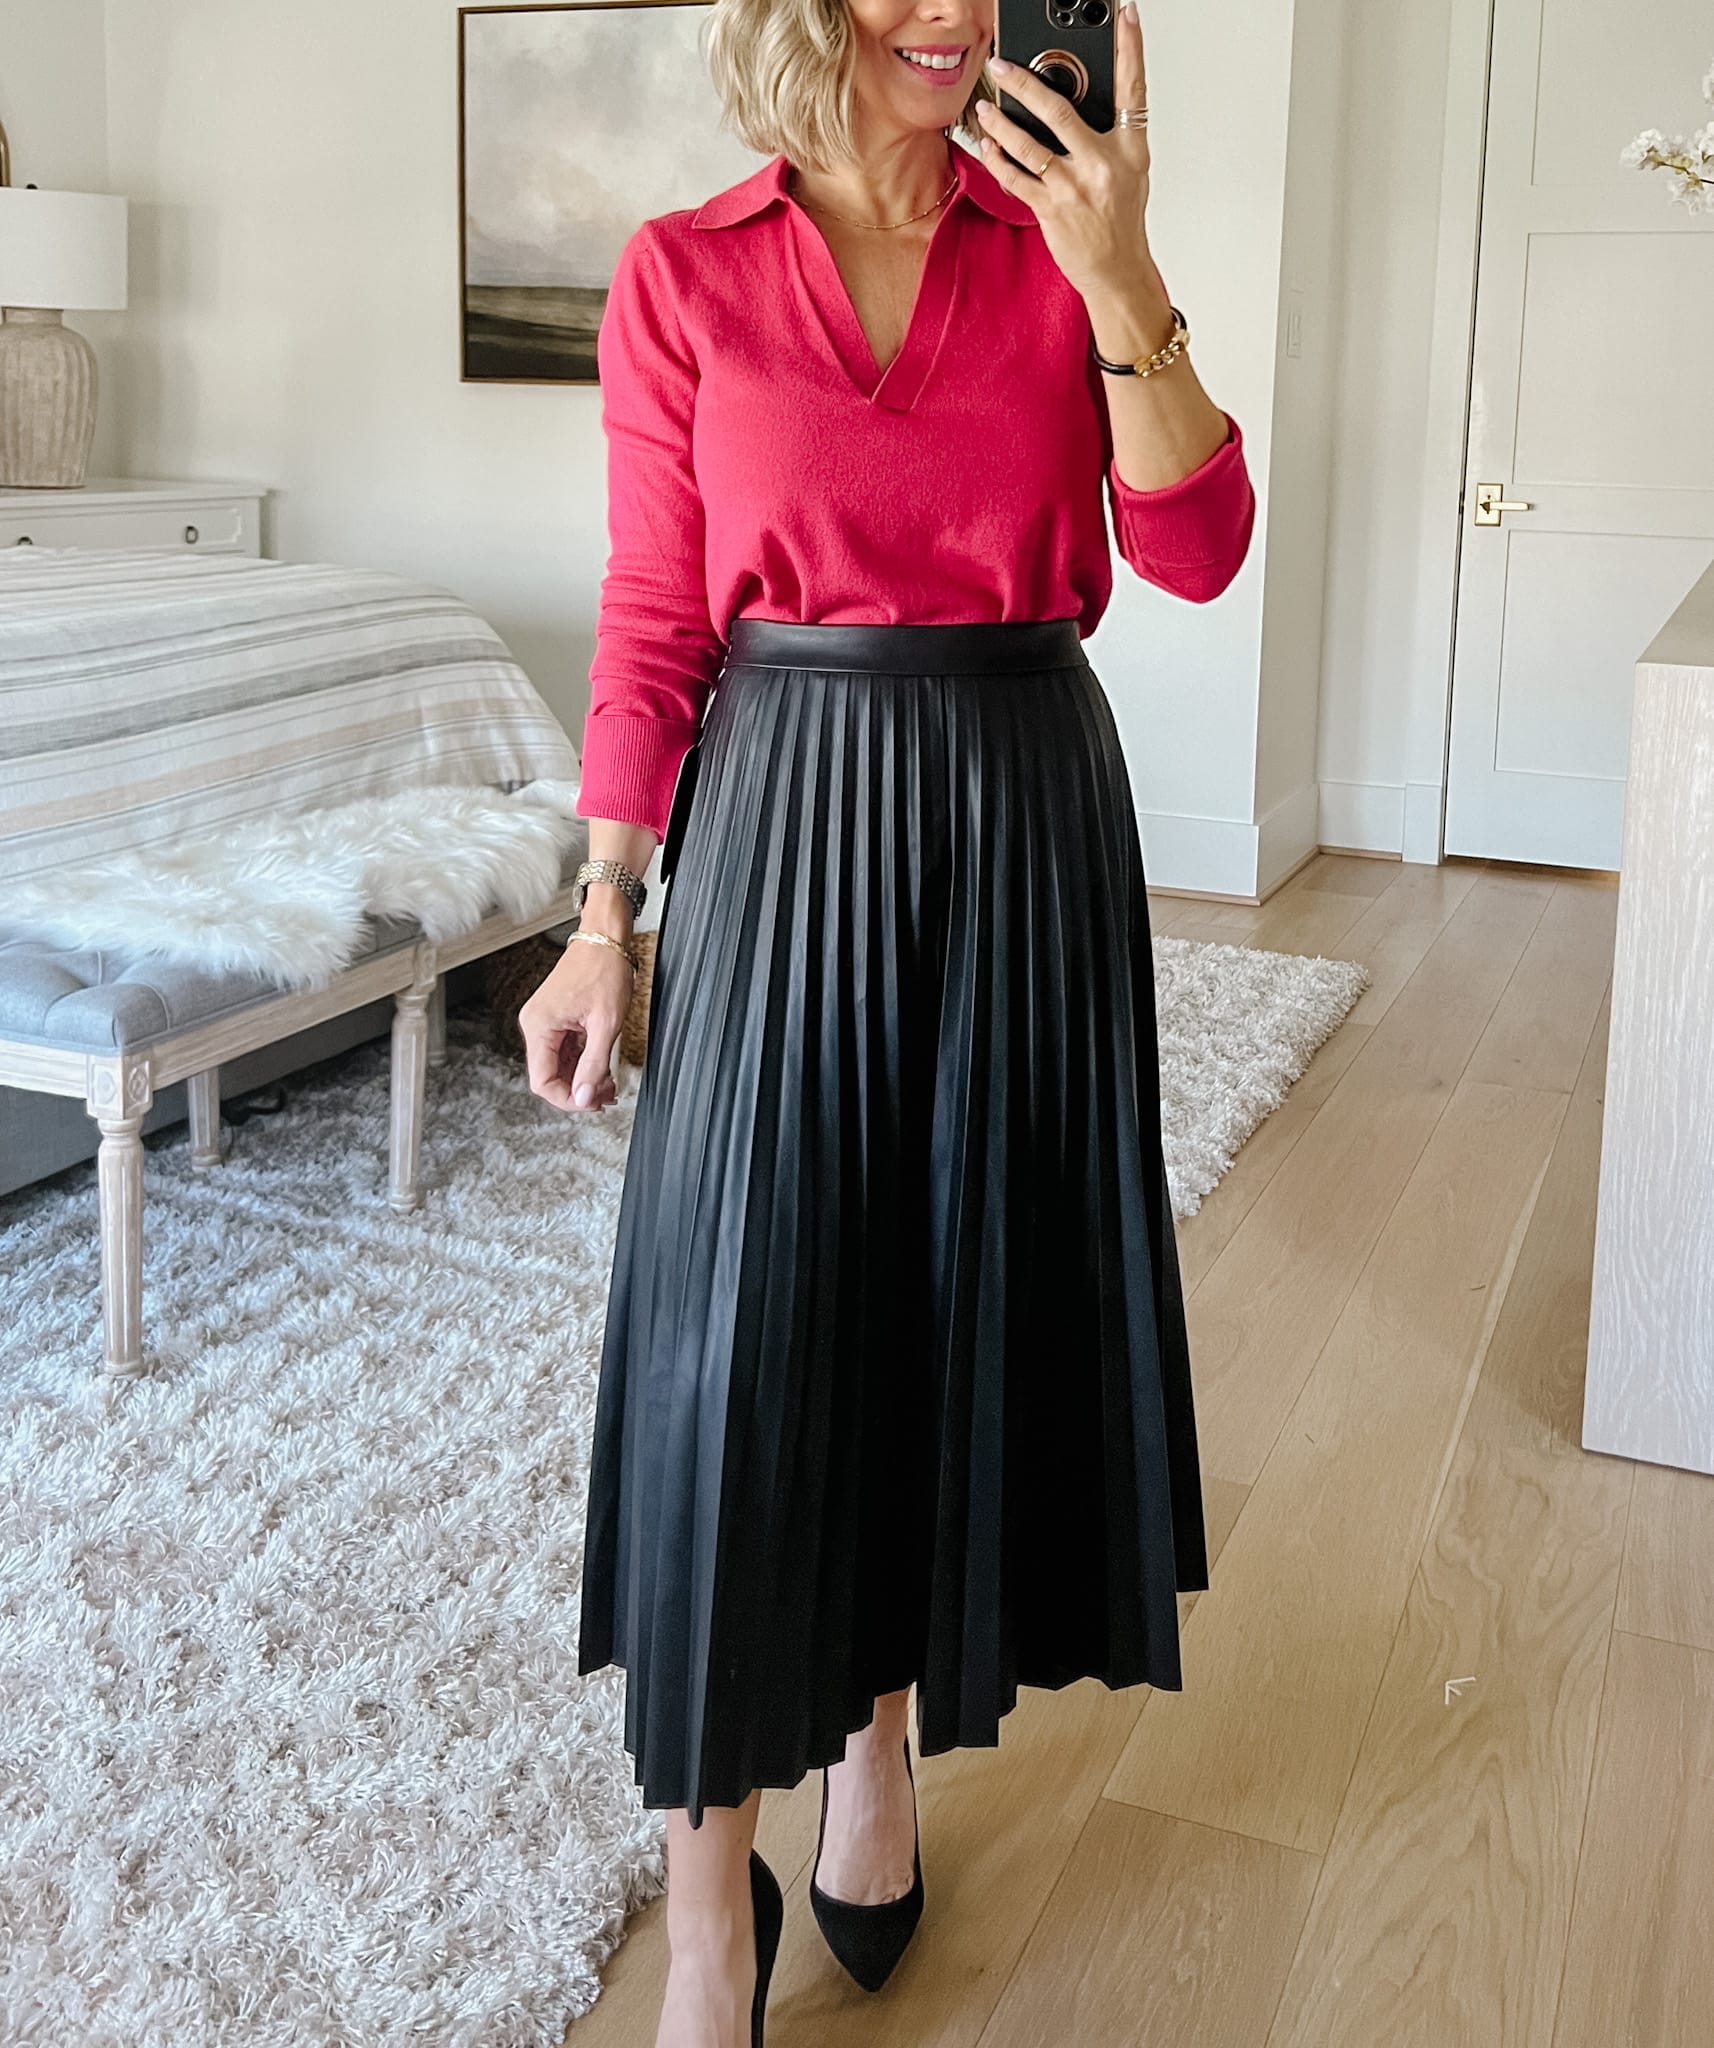 Pink Collared Sweater, Faux Leather skirt, heels 